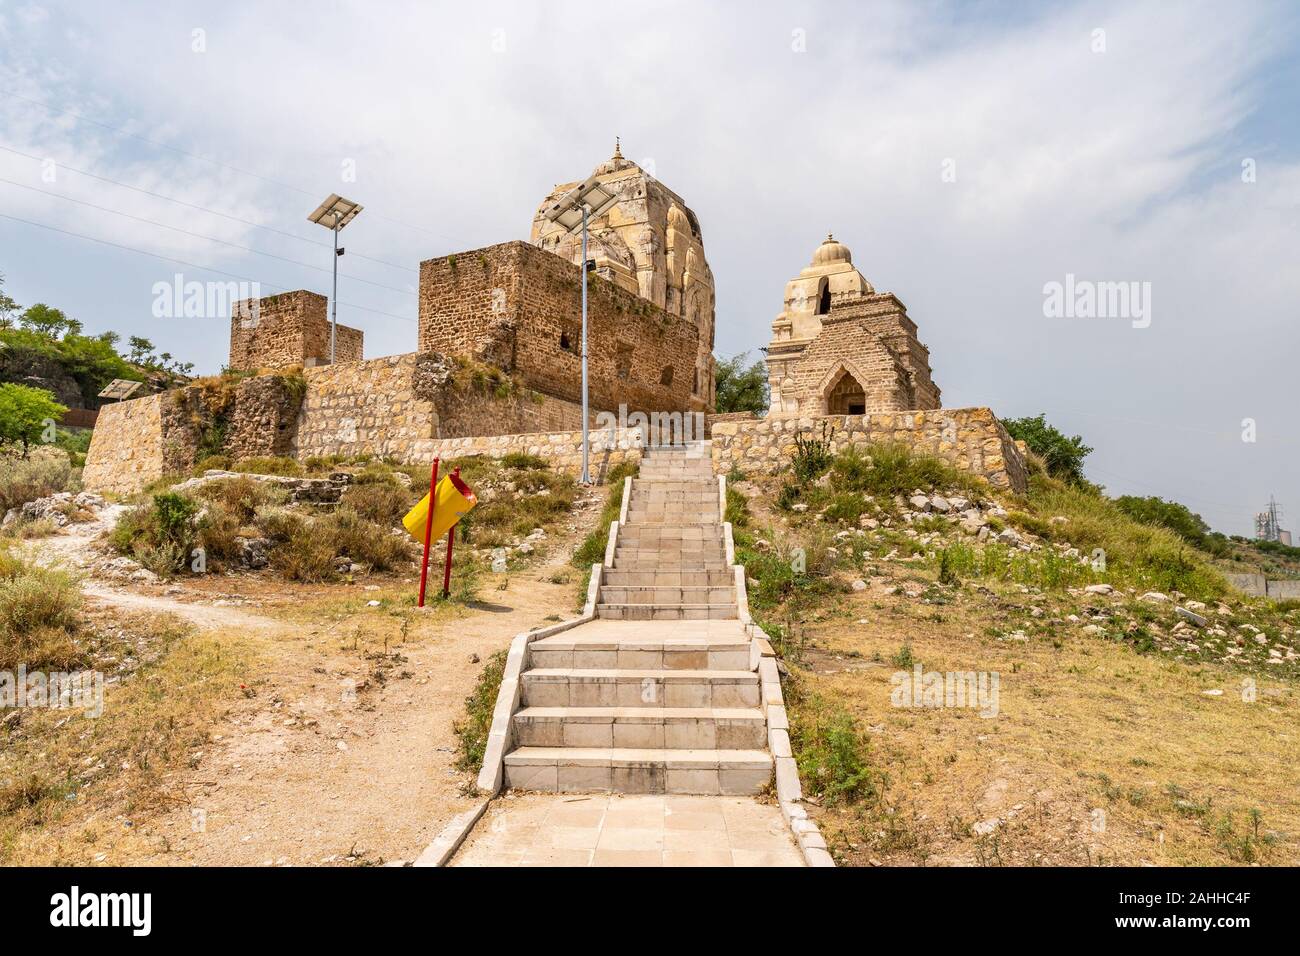 Chakwal Qila Katas Raj Hindu Temples Dedicated to Shiva Picturesque View of Shrines on a Sunny Blue Sky Day Stock Photo